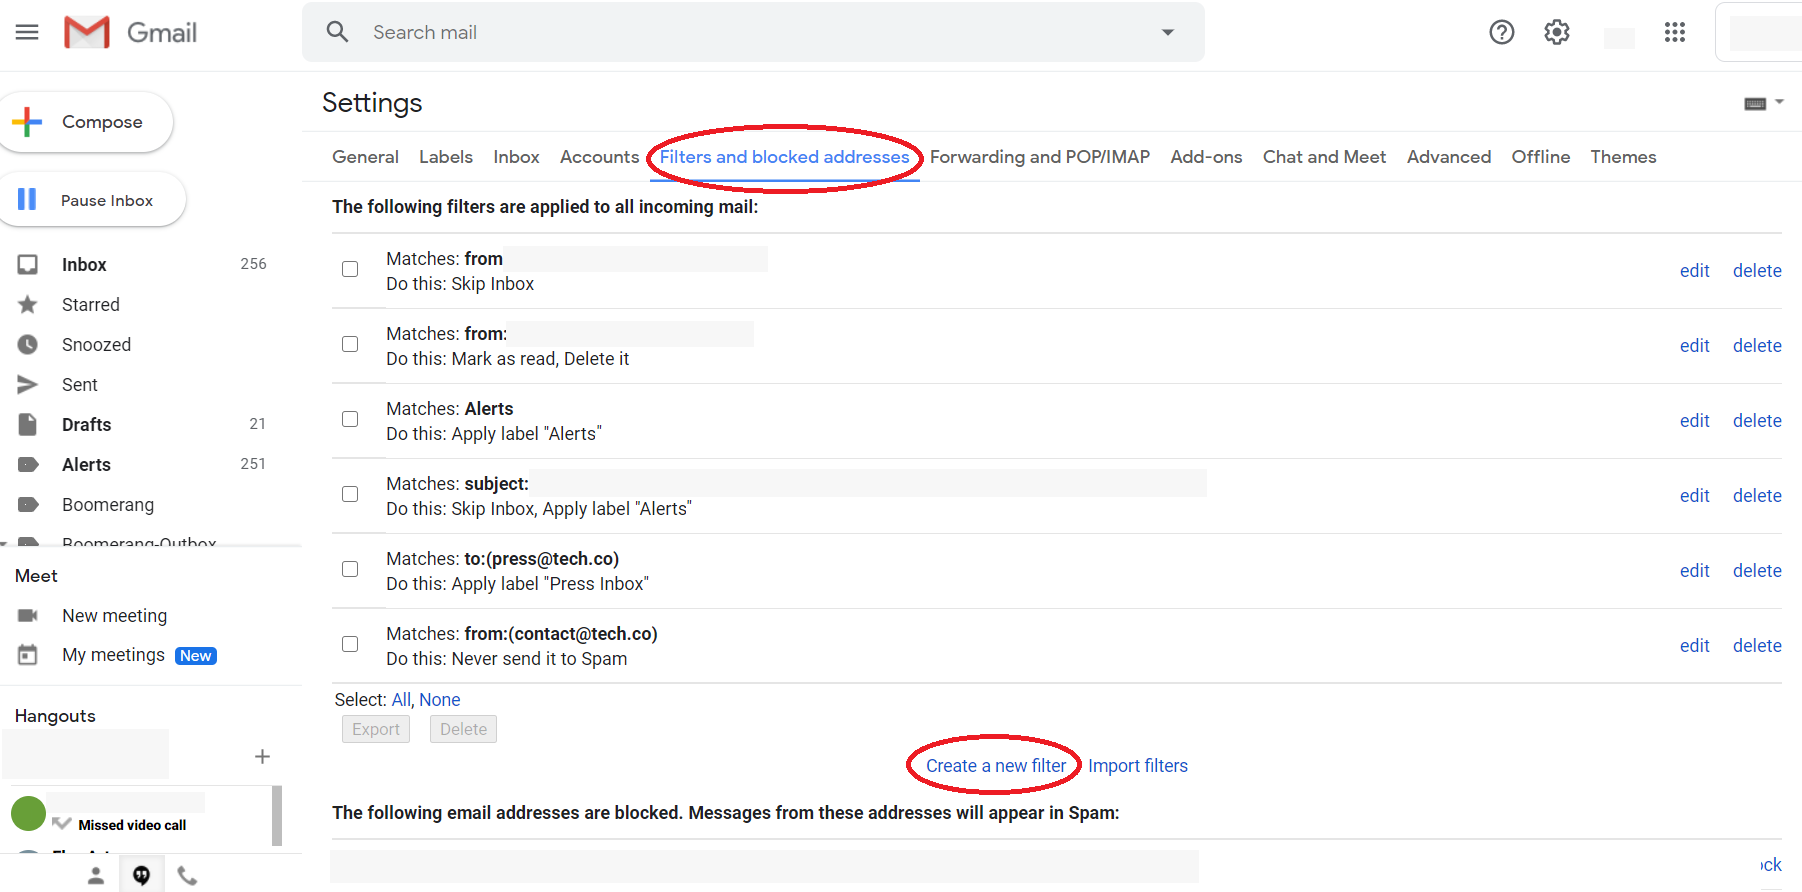 Gmail screenshot - Settings to create rules for spam and filters